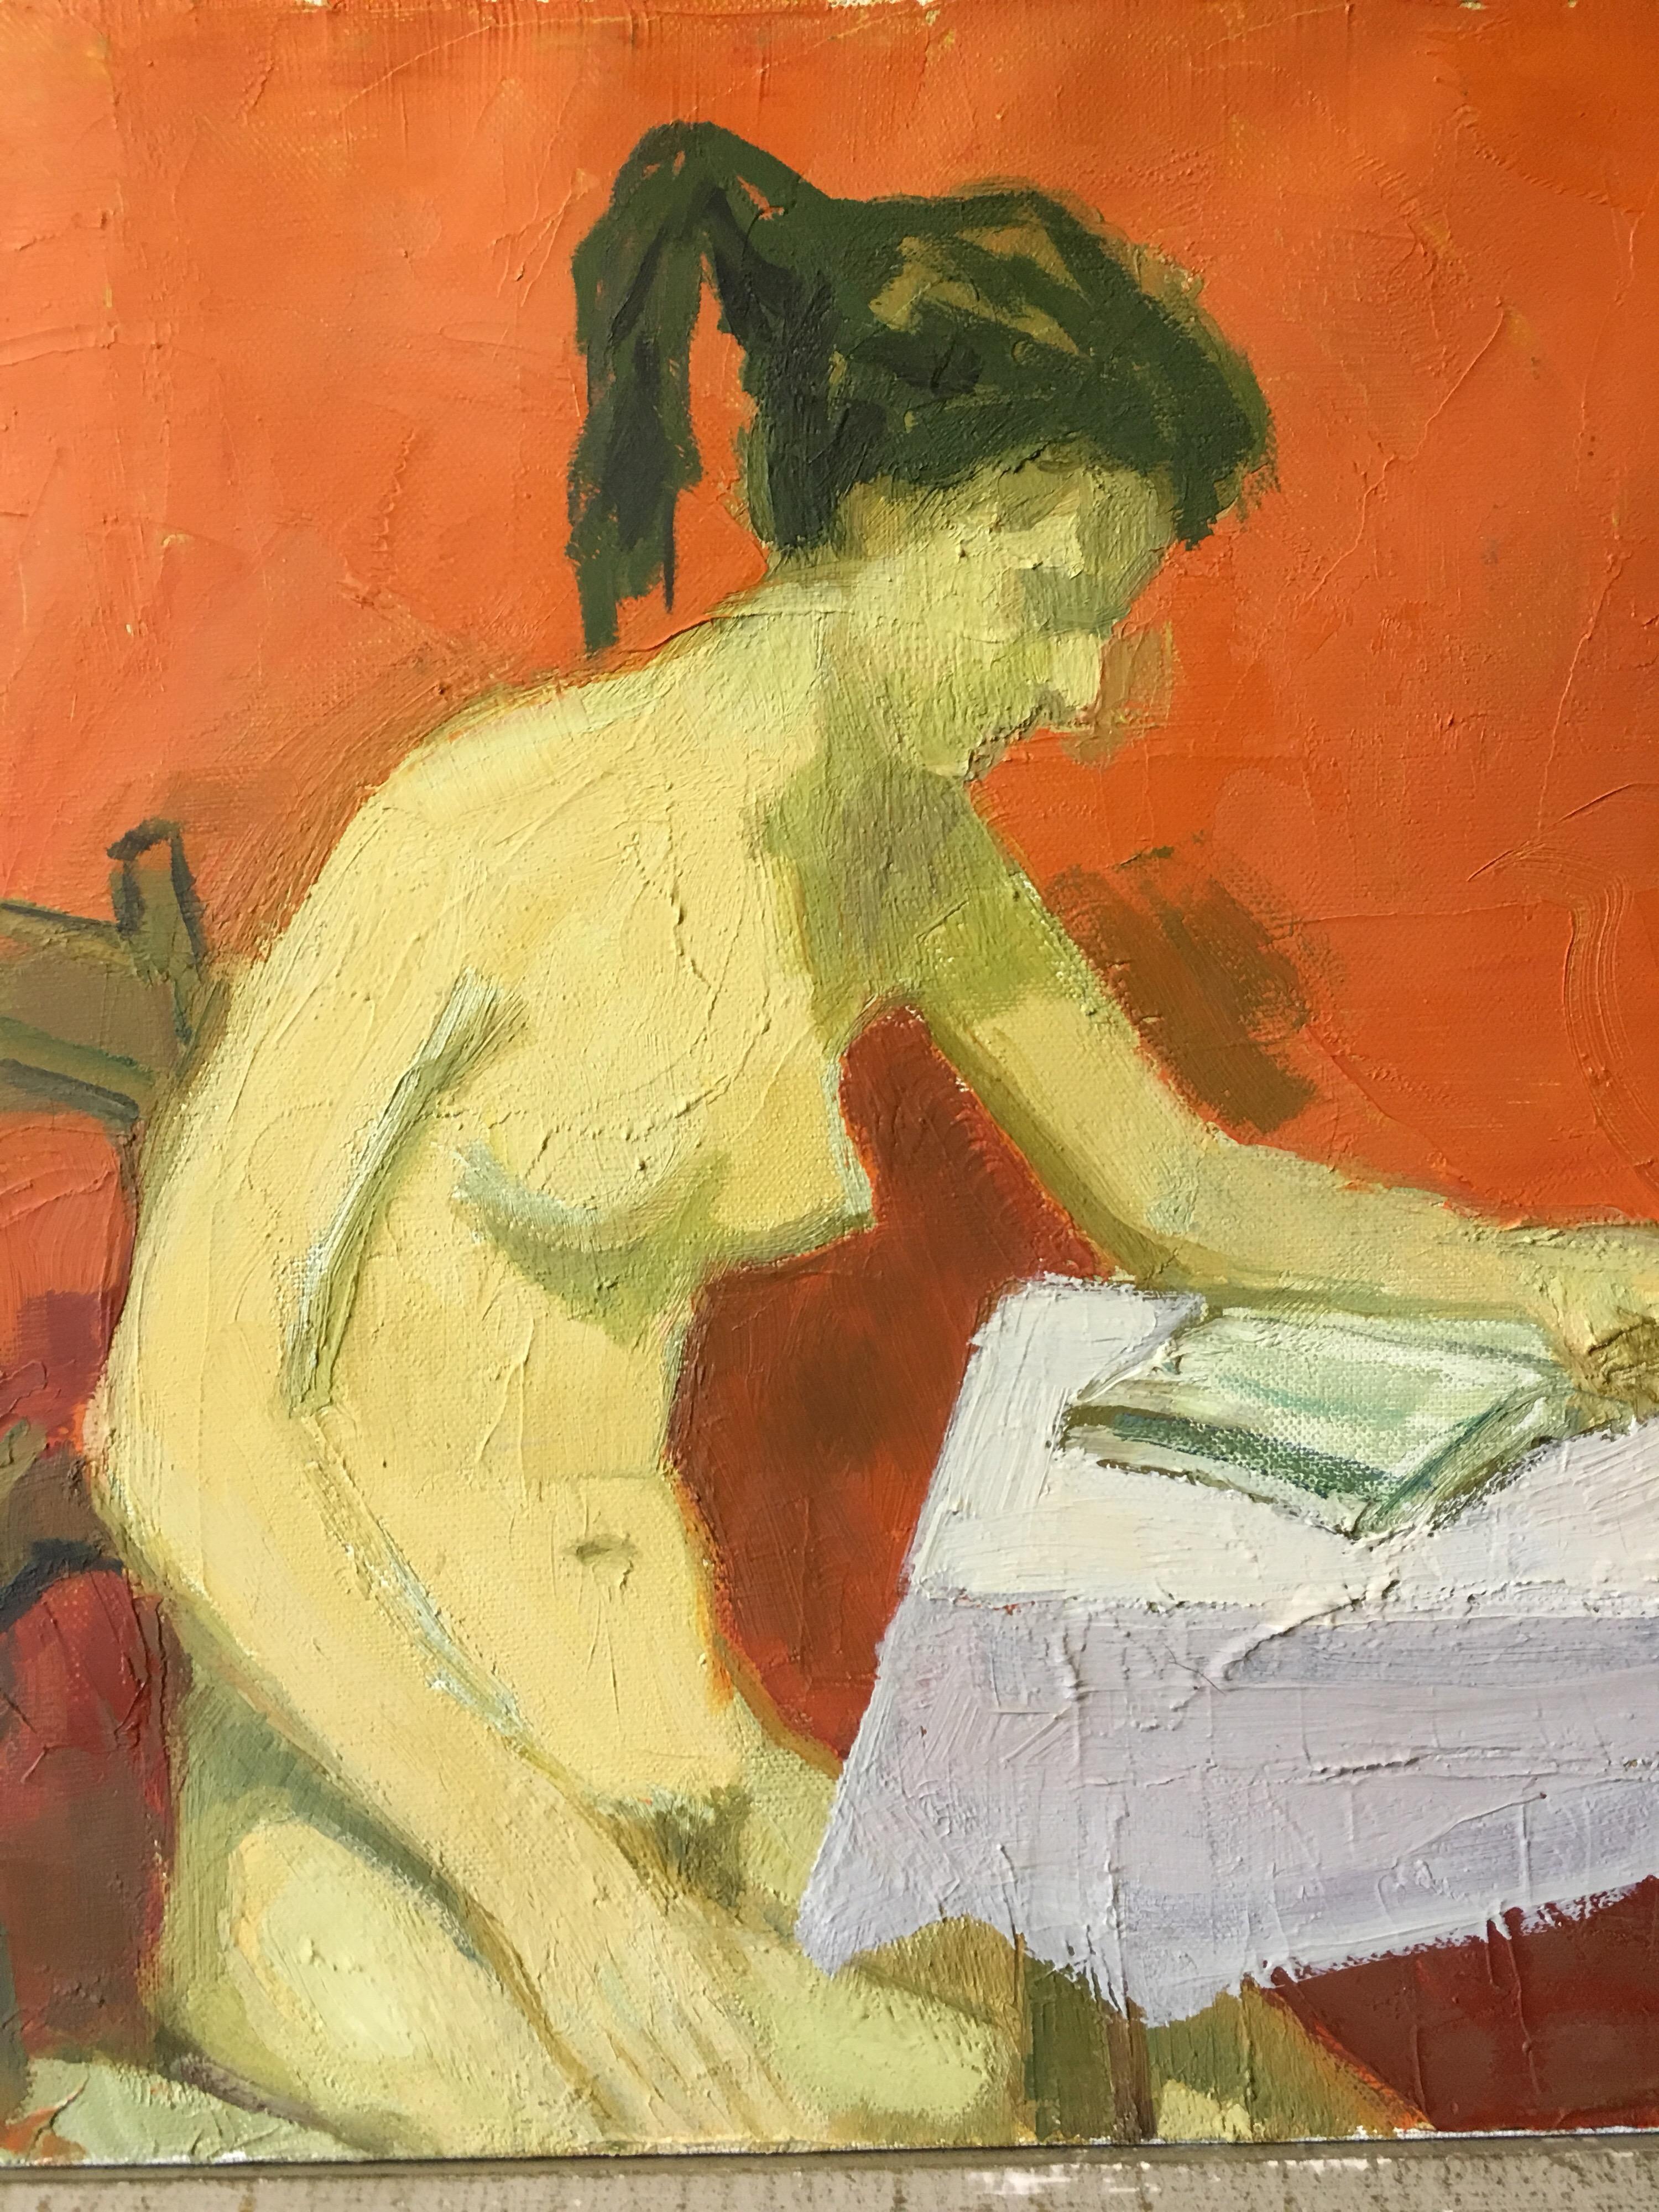 Impressionist Nude, of a Model Sat Reading, Signed Oil Painting
By French artist Claude Benard, (1926 - 2016)
Signed on the top right hand corner
Oil painting on canvas, unframed
Canvas size: 13 x 16 inches

Lovely impressionist nude of a model sat